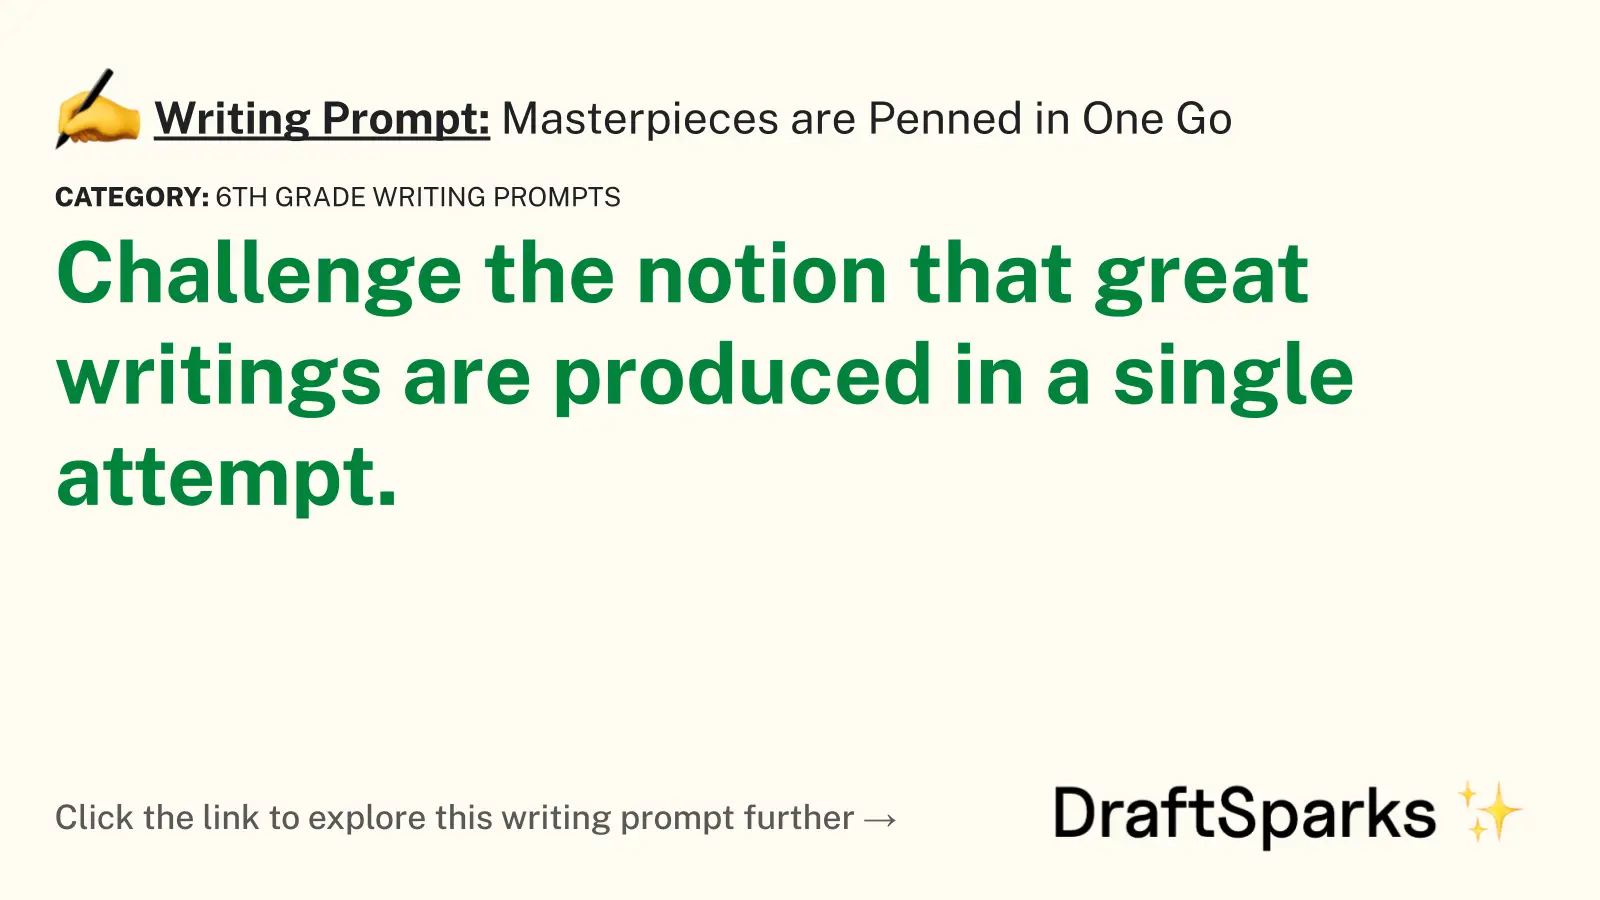 Masterpieces are Penned in One Go